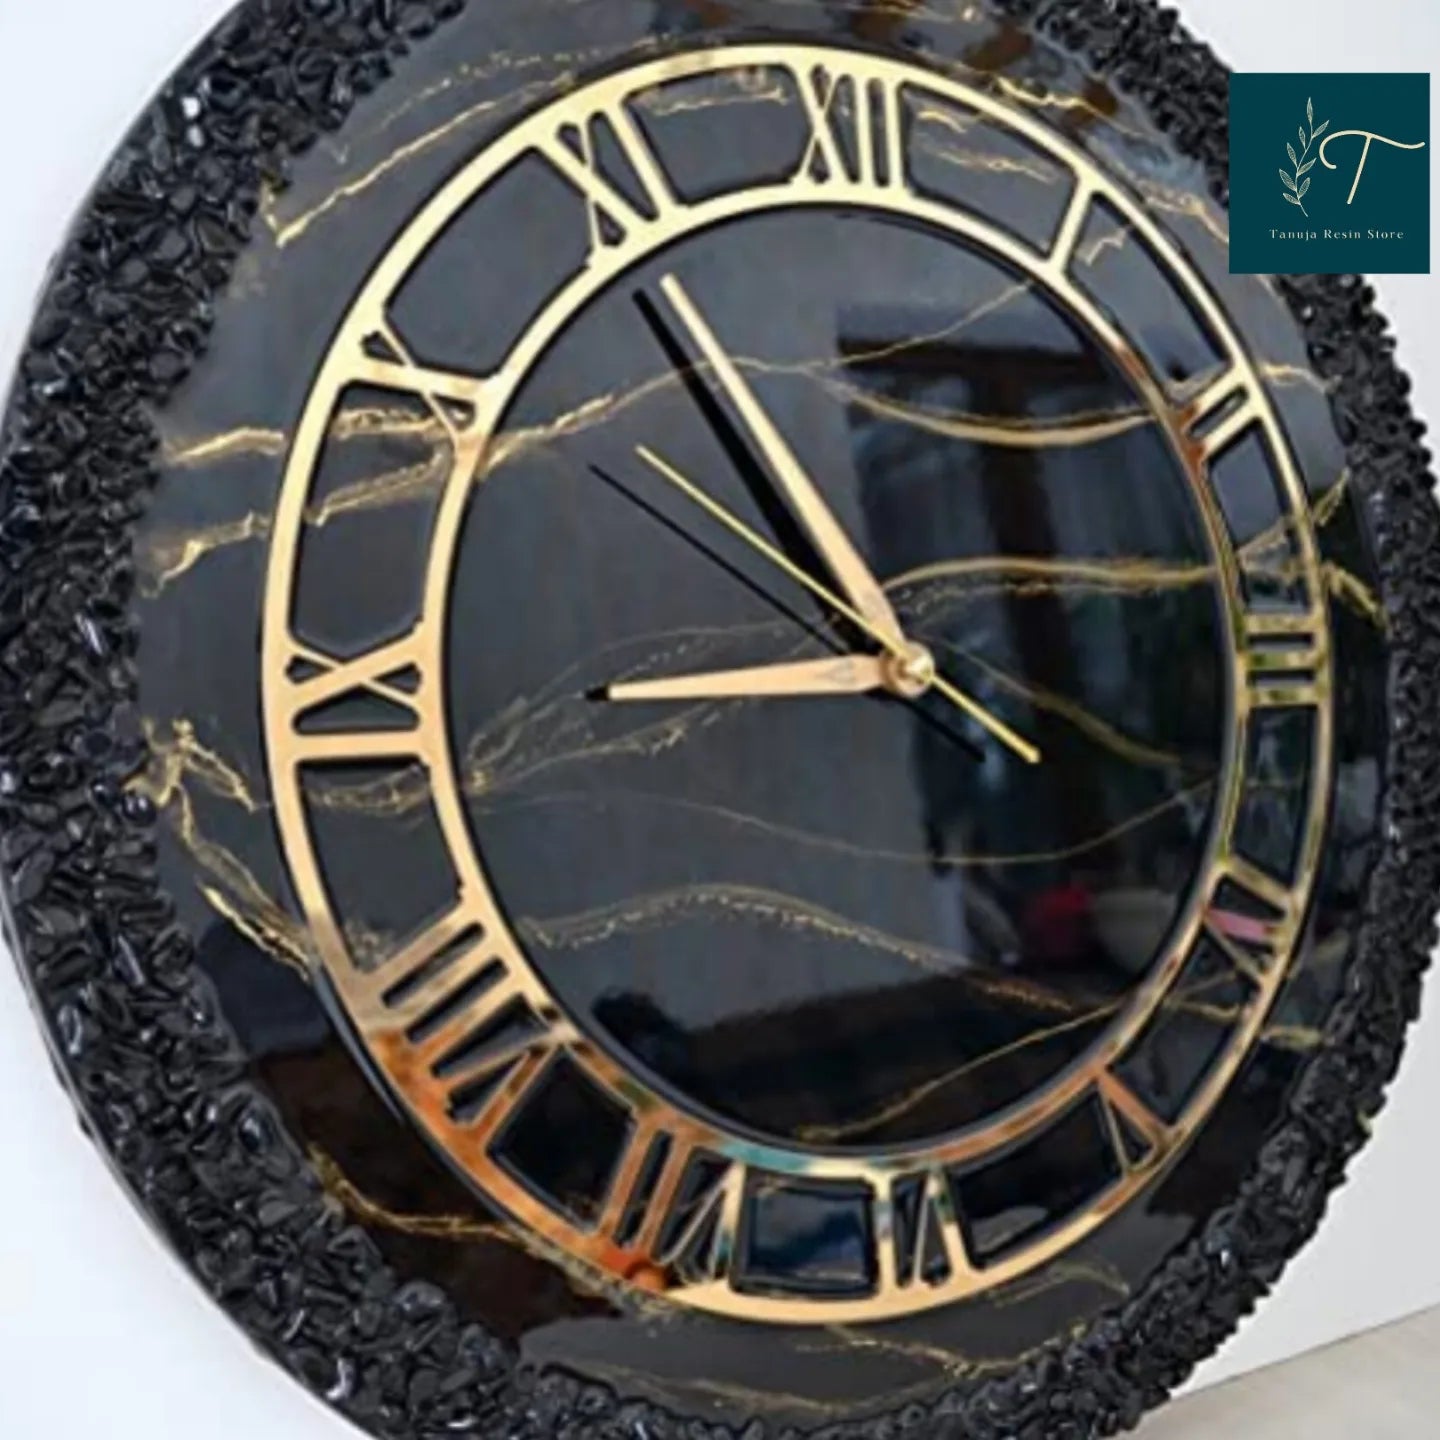 Acrylic cutout for Clock in Roman Number